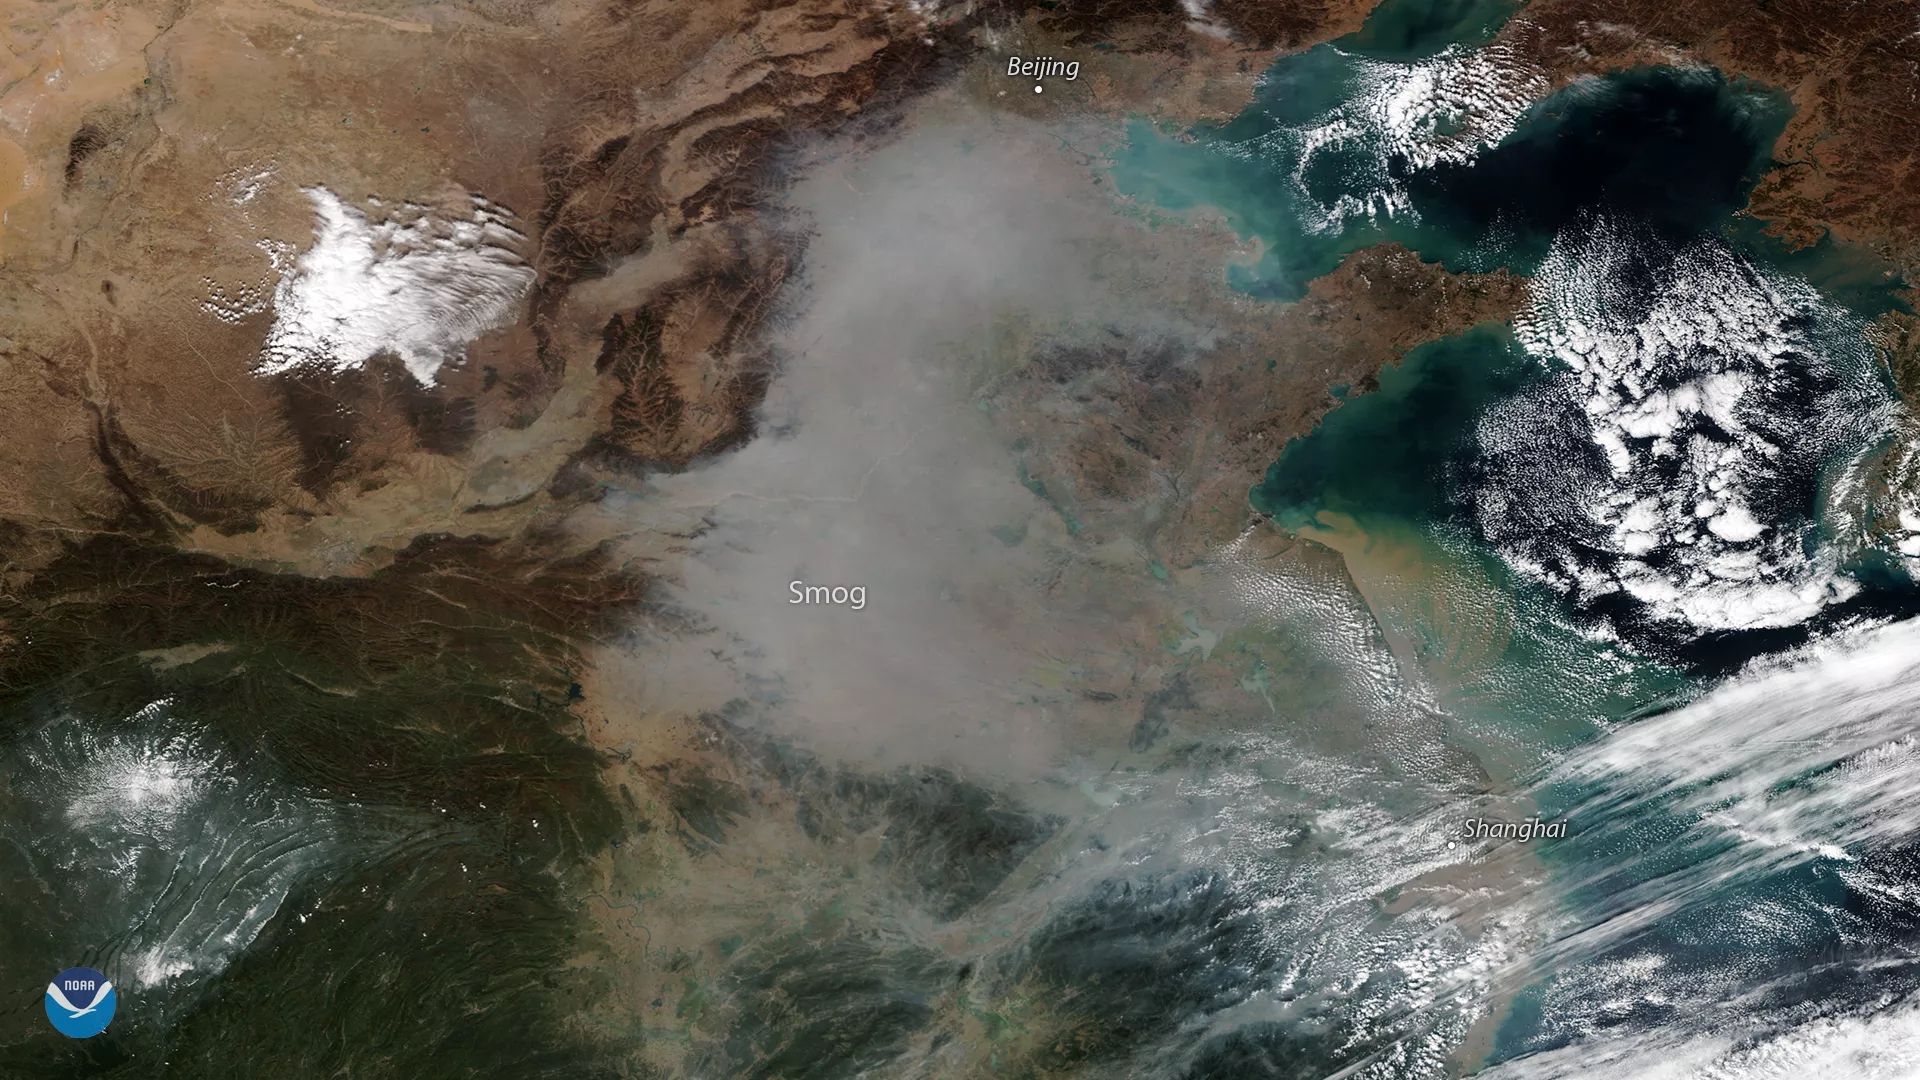 A plume of smog appears over northeastern China in this true-color image seen from the NOAA-20 satellite on October 31, 2018.